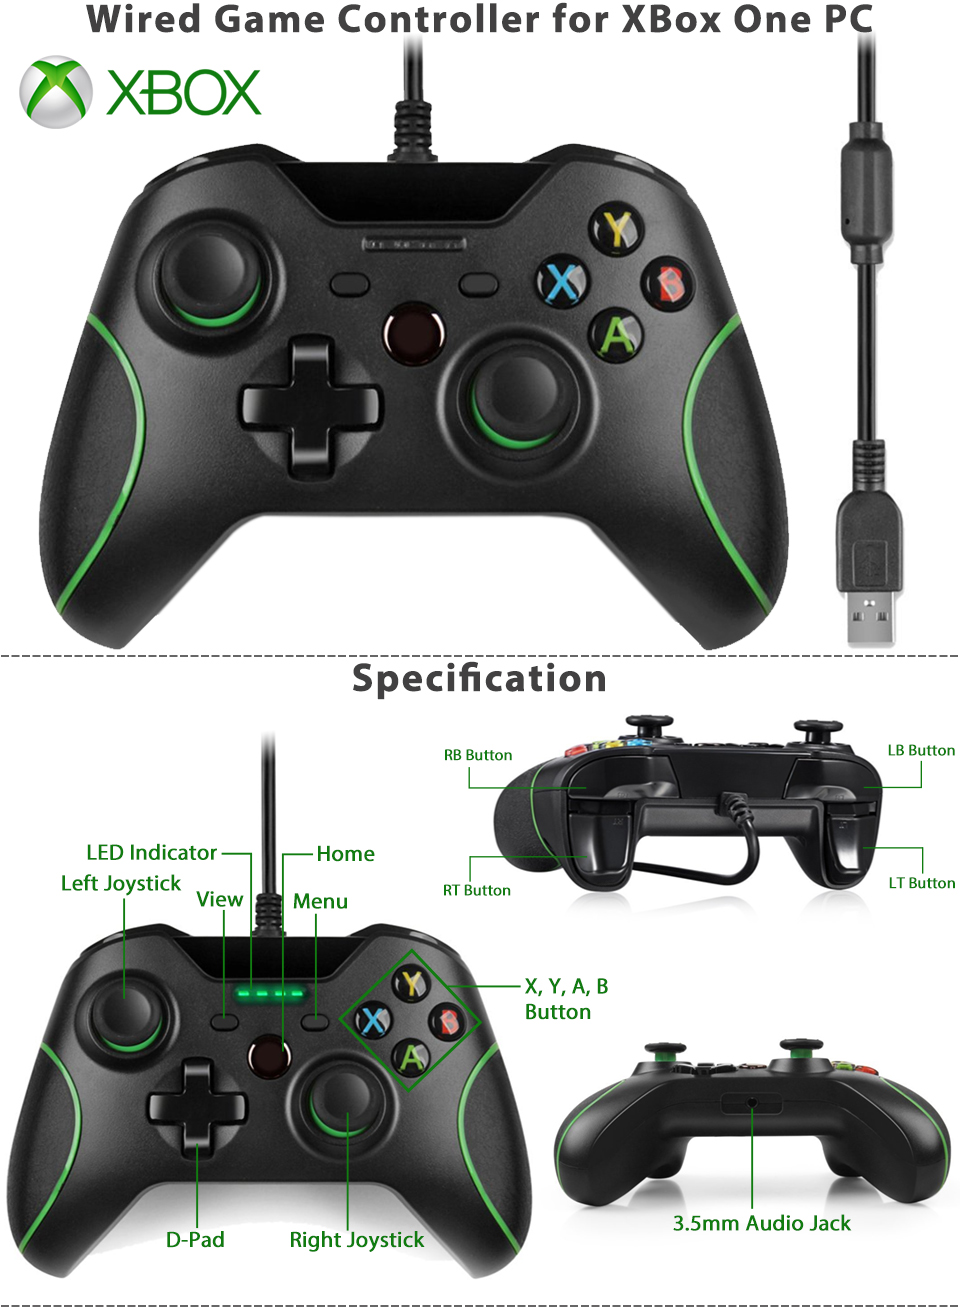 Wired Game Controller/Gamepad for Xbox One